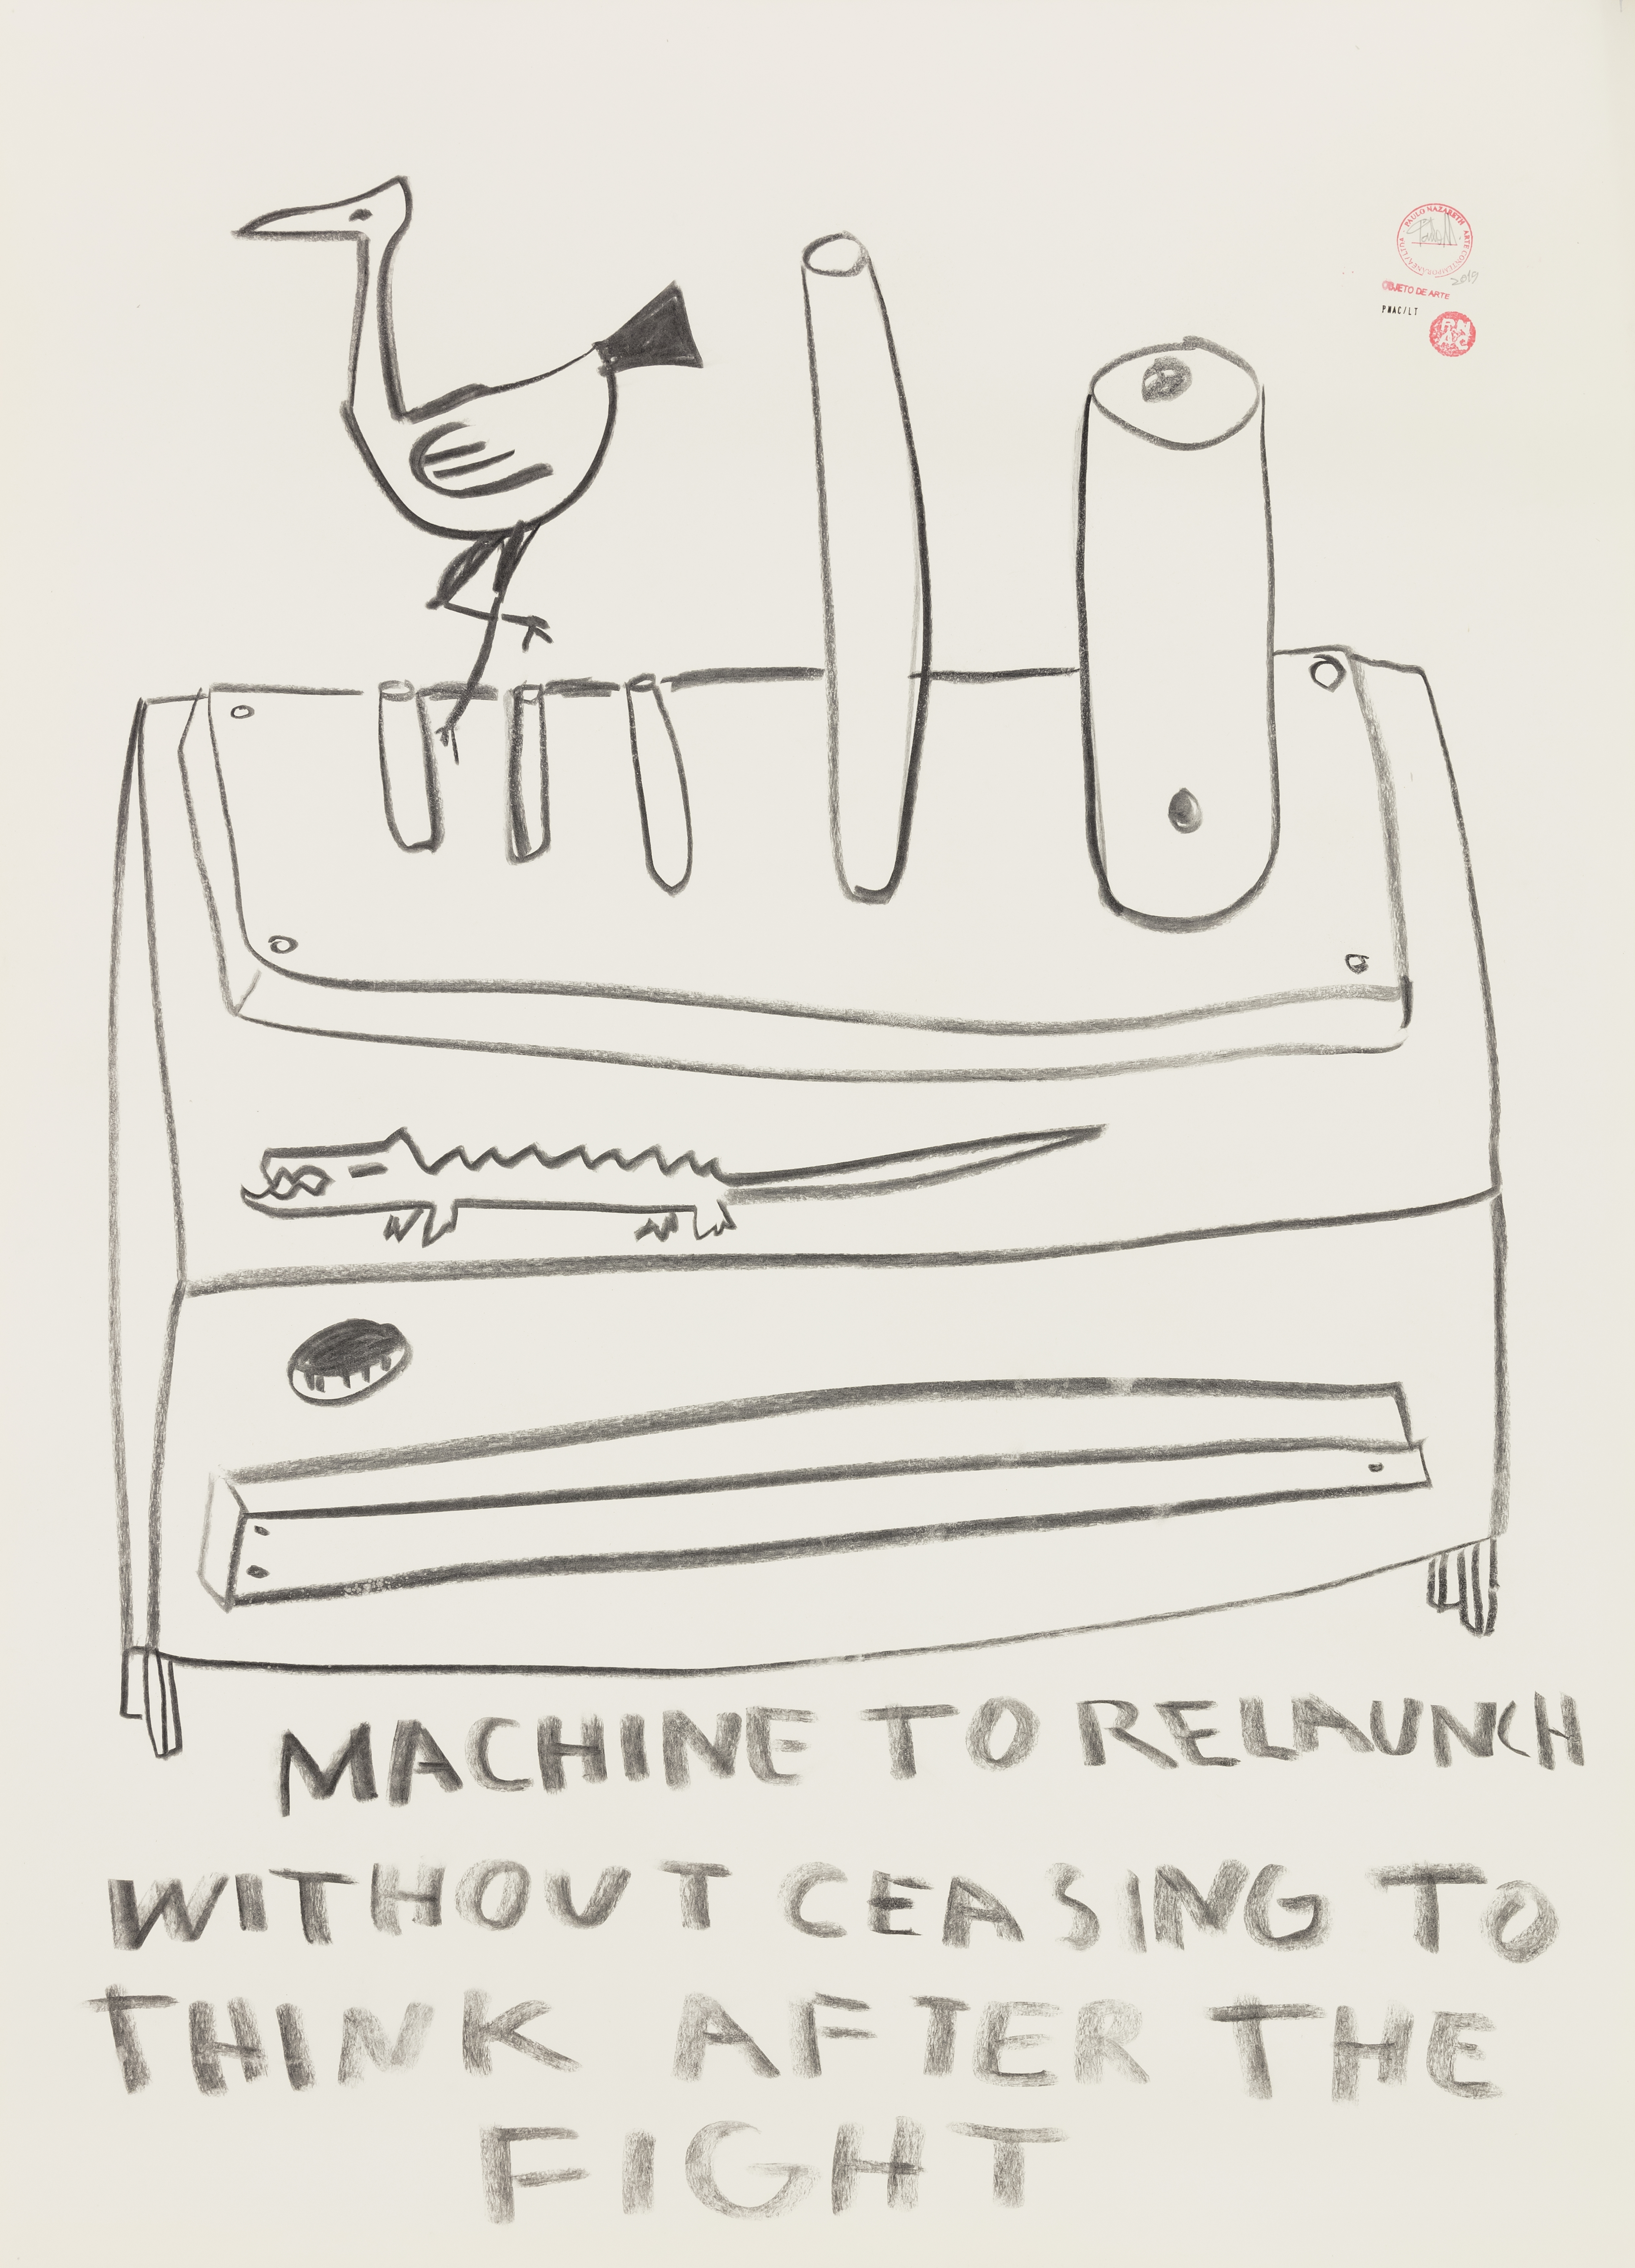 Paulo Nazareth - MACHINE TO RELAUNCH WITHOUT CEASING TO THINK AFTER THE FIGHT, 2019